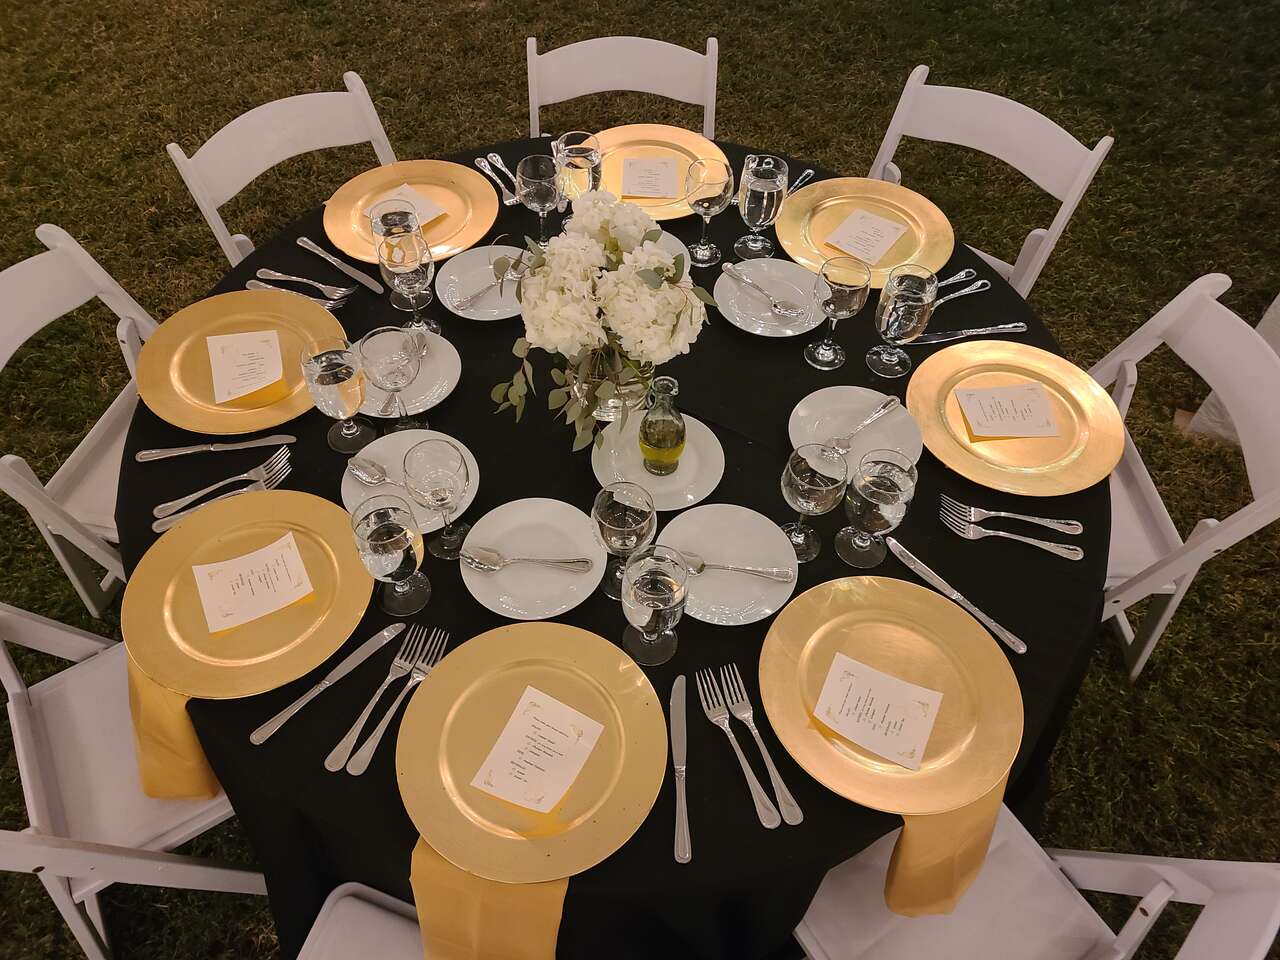 Torkay Banquet Chair and Tables Rentals